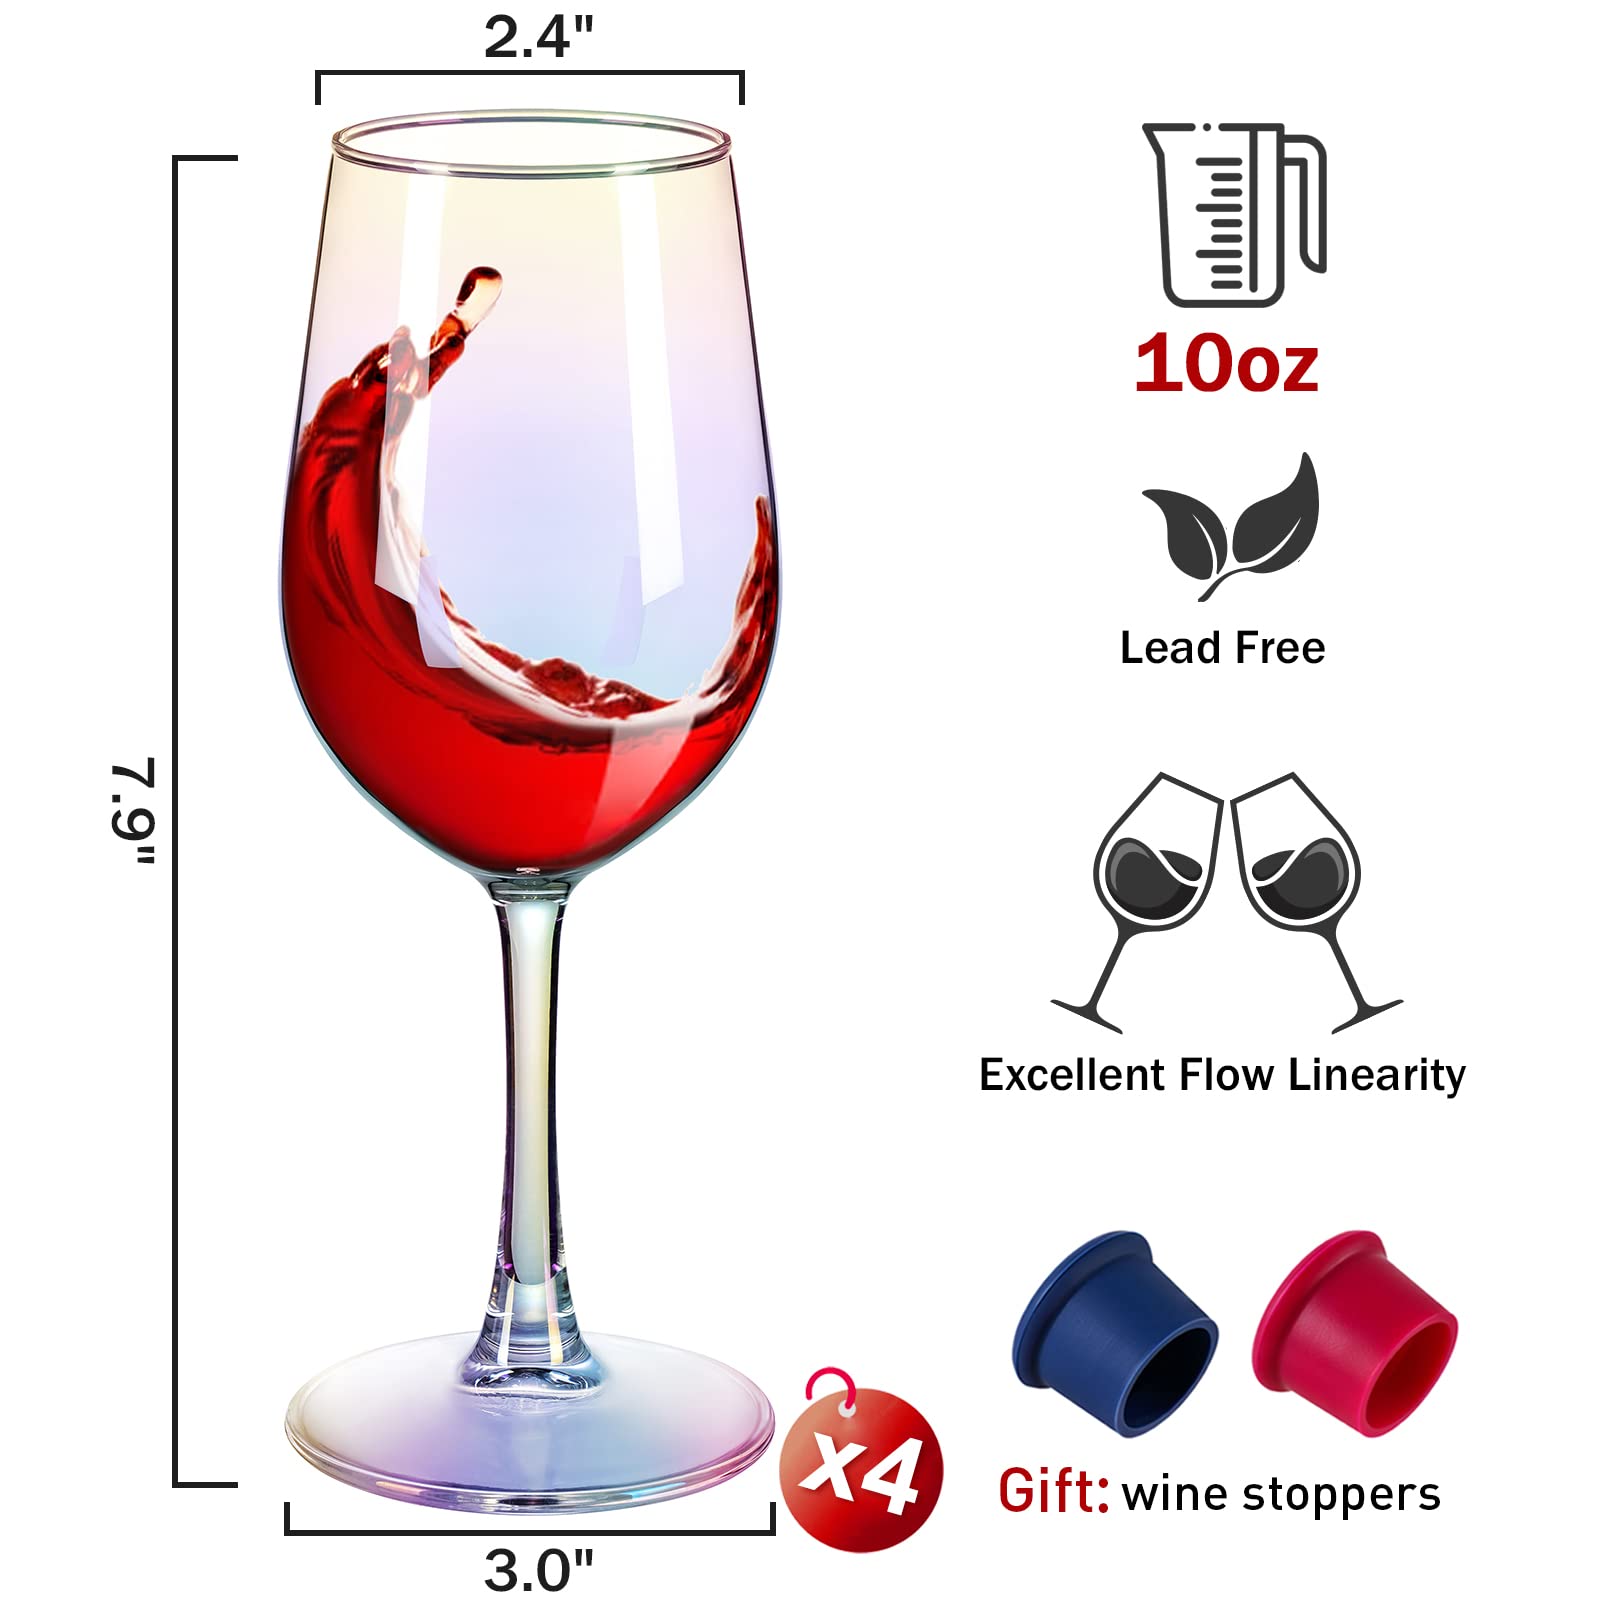 GoldArea Wine Glasses Set of 4, 10oz Iridescent Crystal Wine Glasses, Long Stem Colored Wine Glasses for Red and White Wine, Ideal Gift for Wine Lovers, Birthday, Wedding